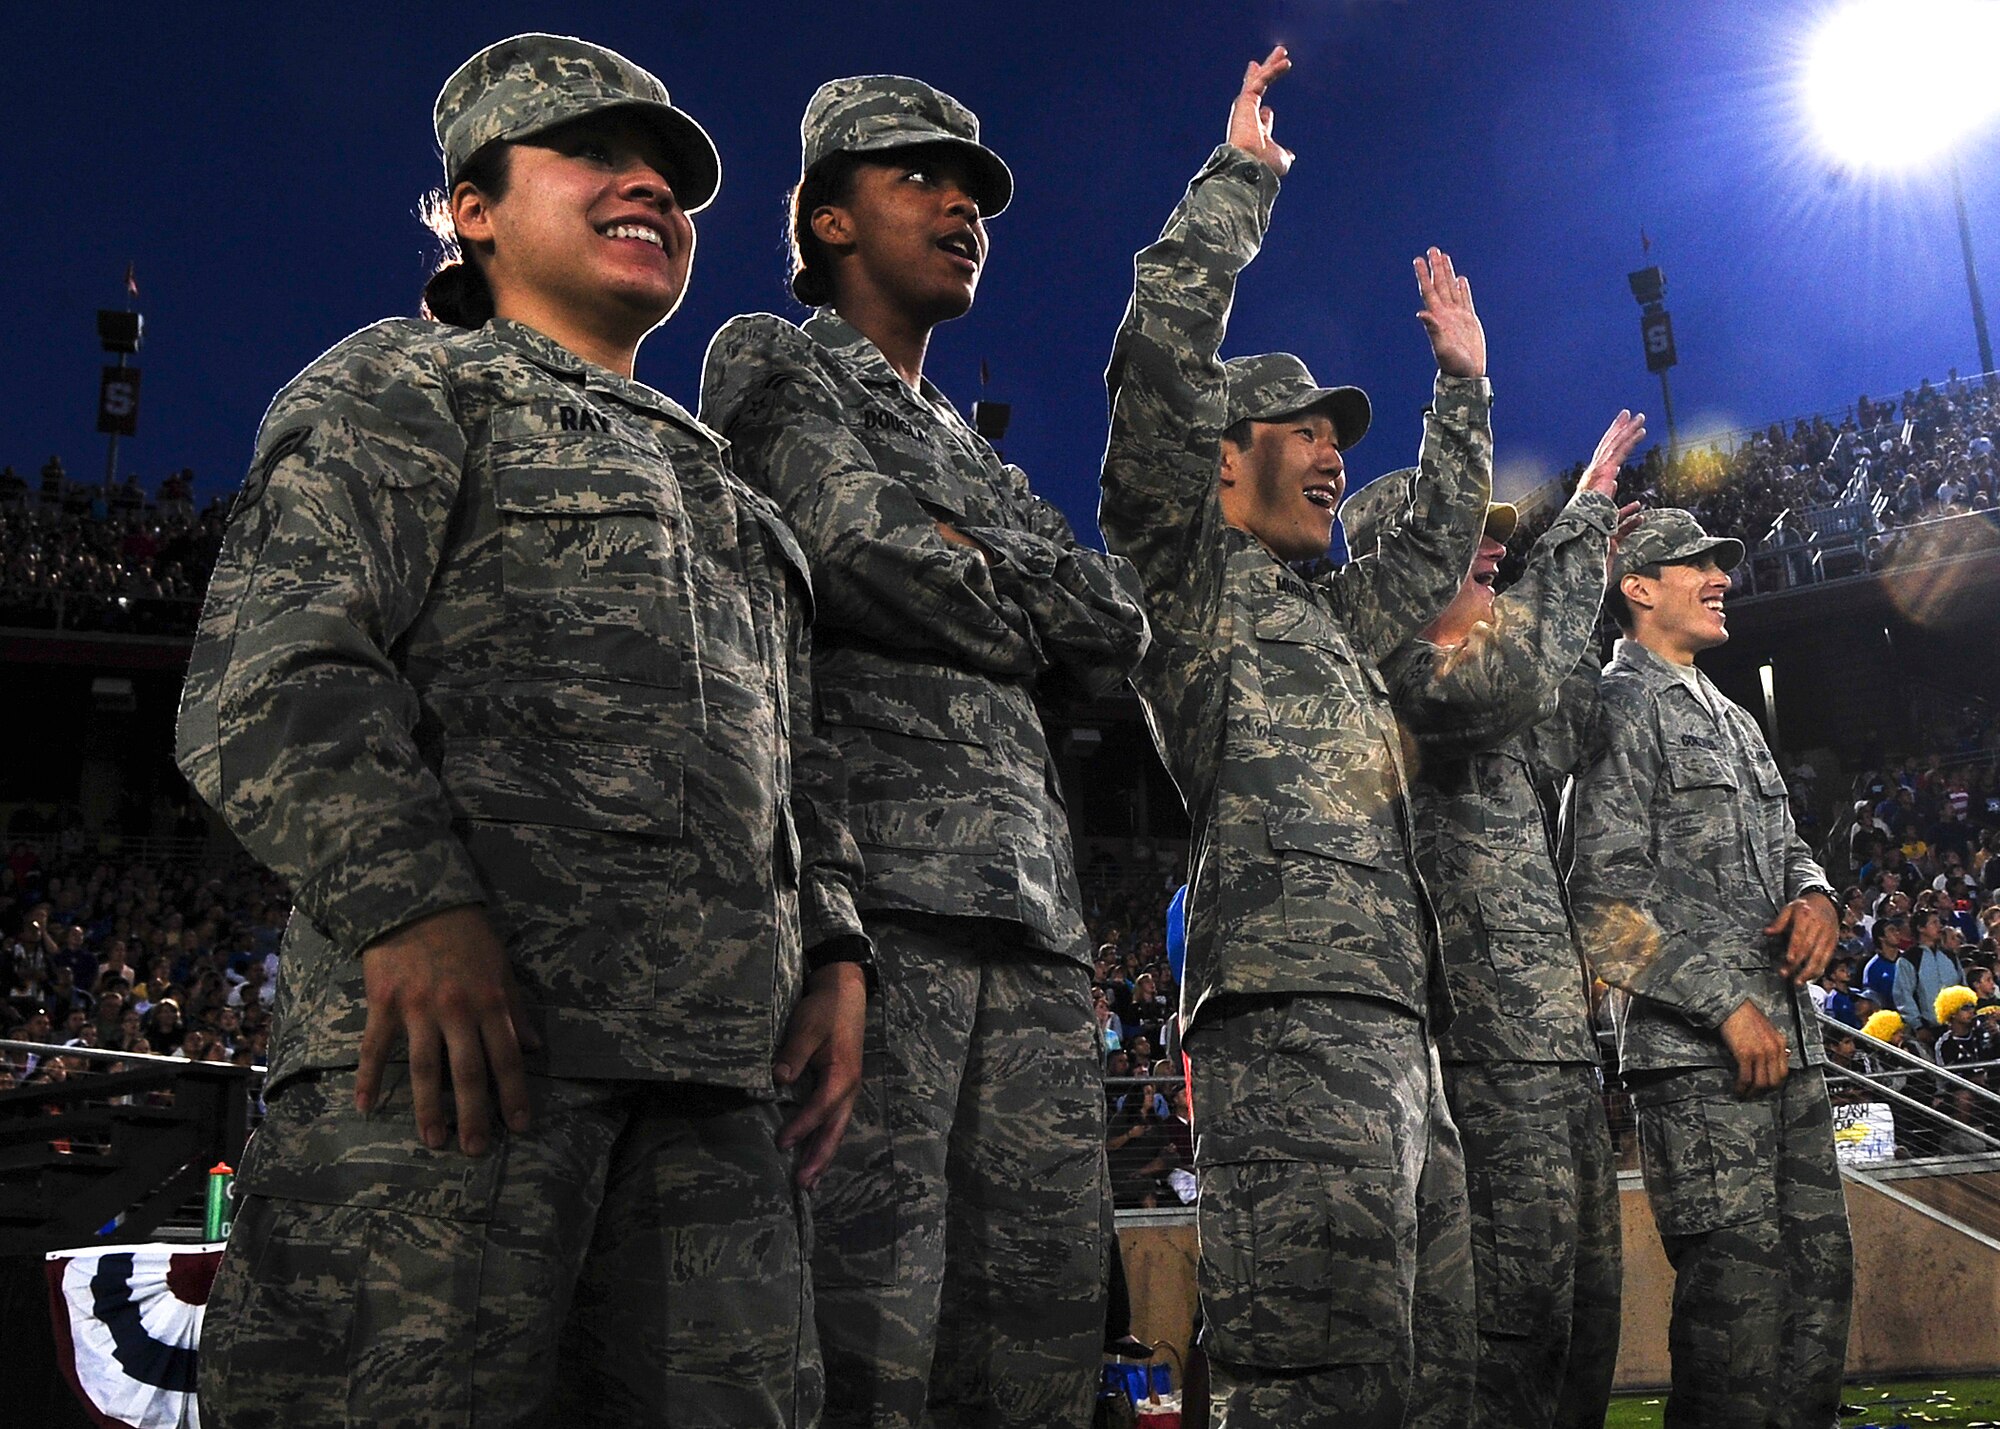 Members of Beale Air Force Base, Calif., cheer during the L.A. Galaxy versus San Jose Earthquakes game June 30 at Stanford University stadium. More than 300 servicemembers participated in the military appreciation night which highlighted the sacrifices troops make every day. (U.S. Air Force photo by Senior Airman Shawn Nickel)